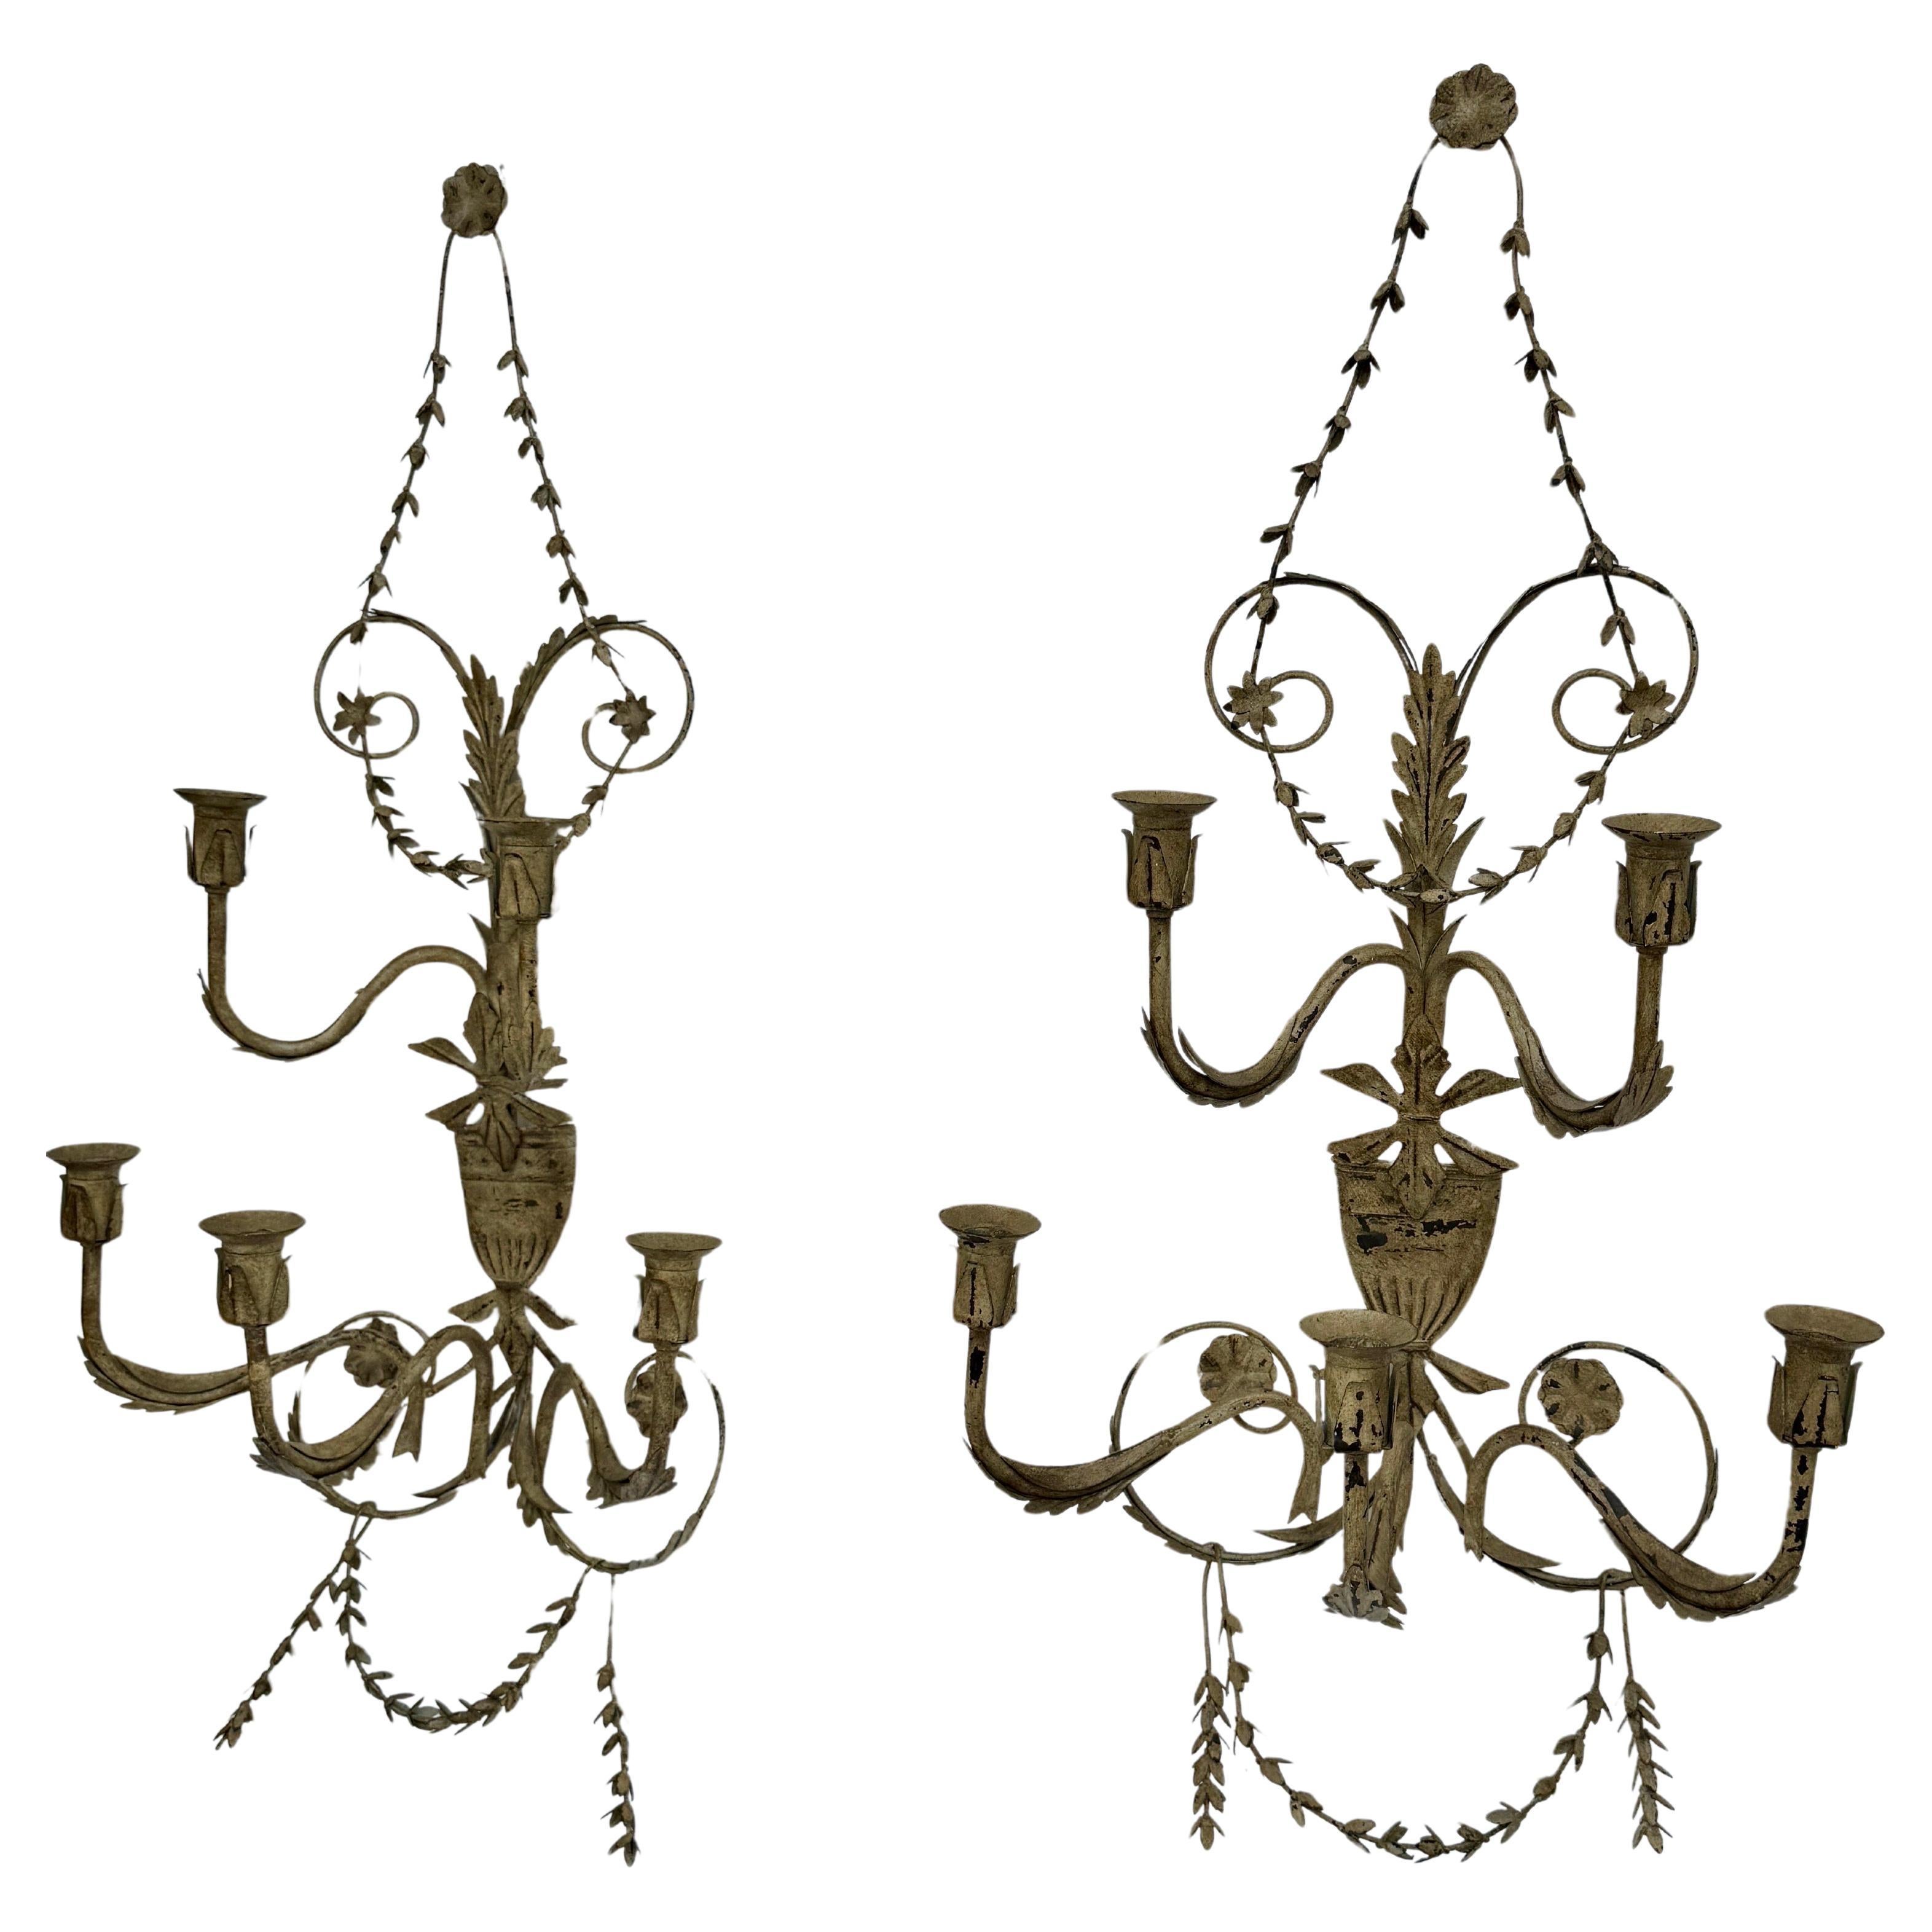 Decorative Metal Candle Wall Sconces, France 

Impressive Pair of Candle Sconces that accomodates 5 candles each. This set in a neutral color is aesthetically pleasing in their style and construction. Perfect enhancing a hallway, dining room, living